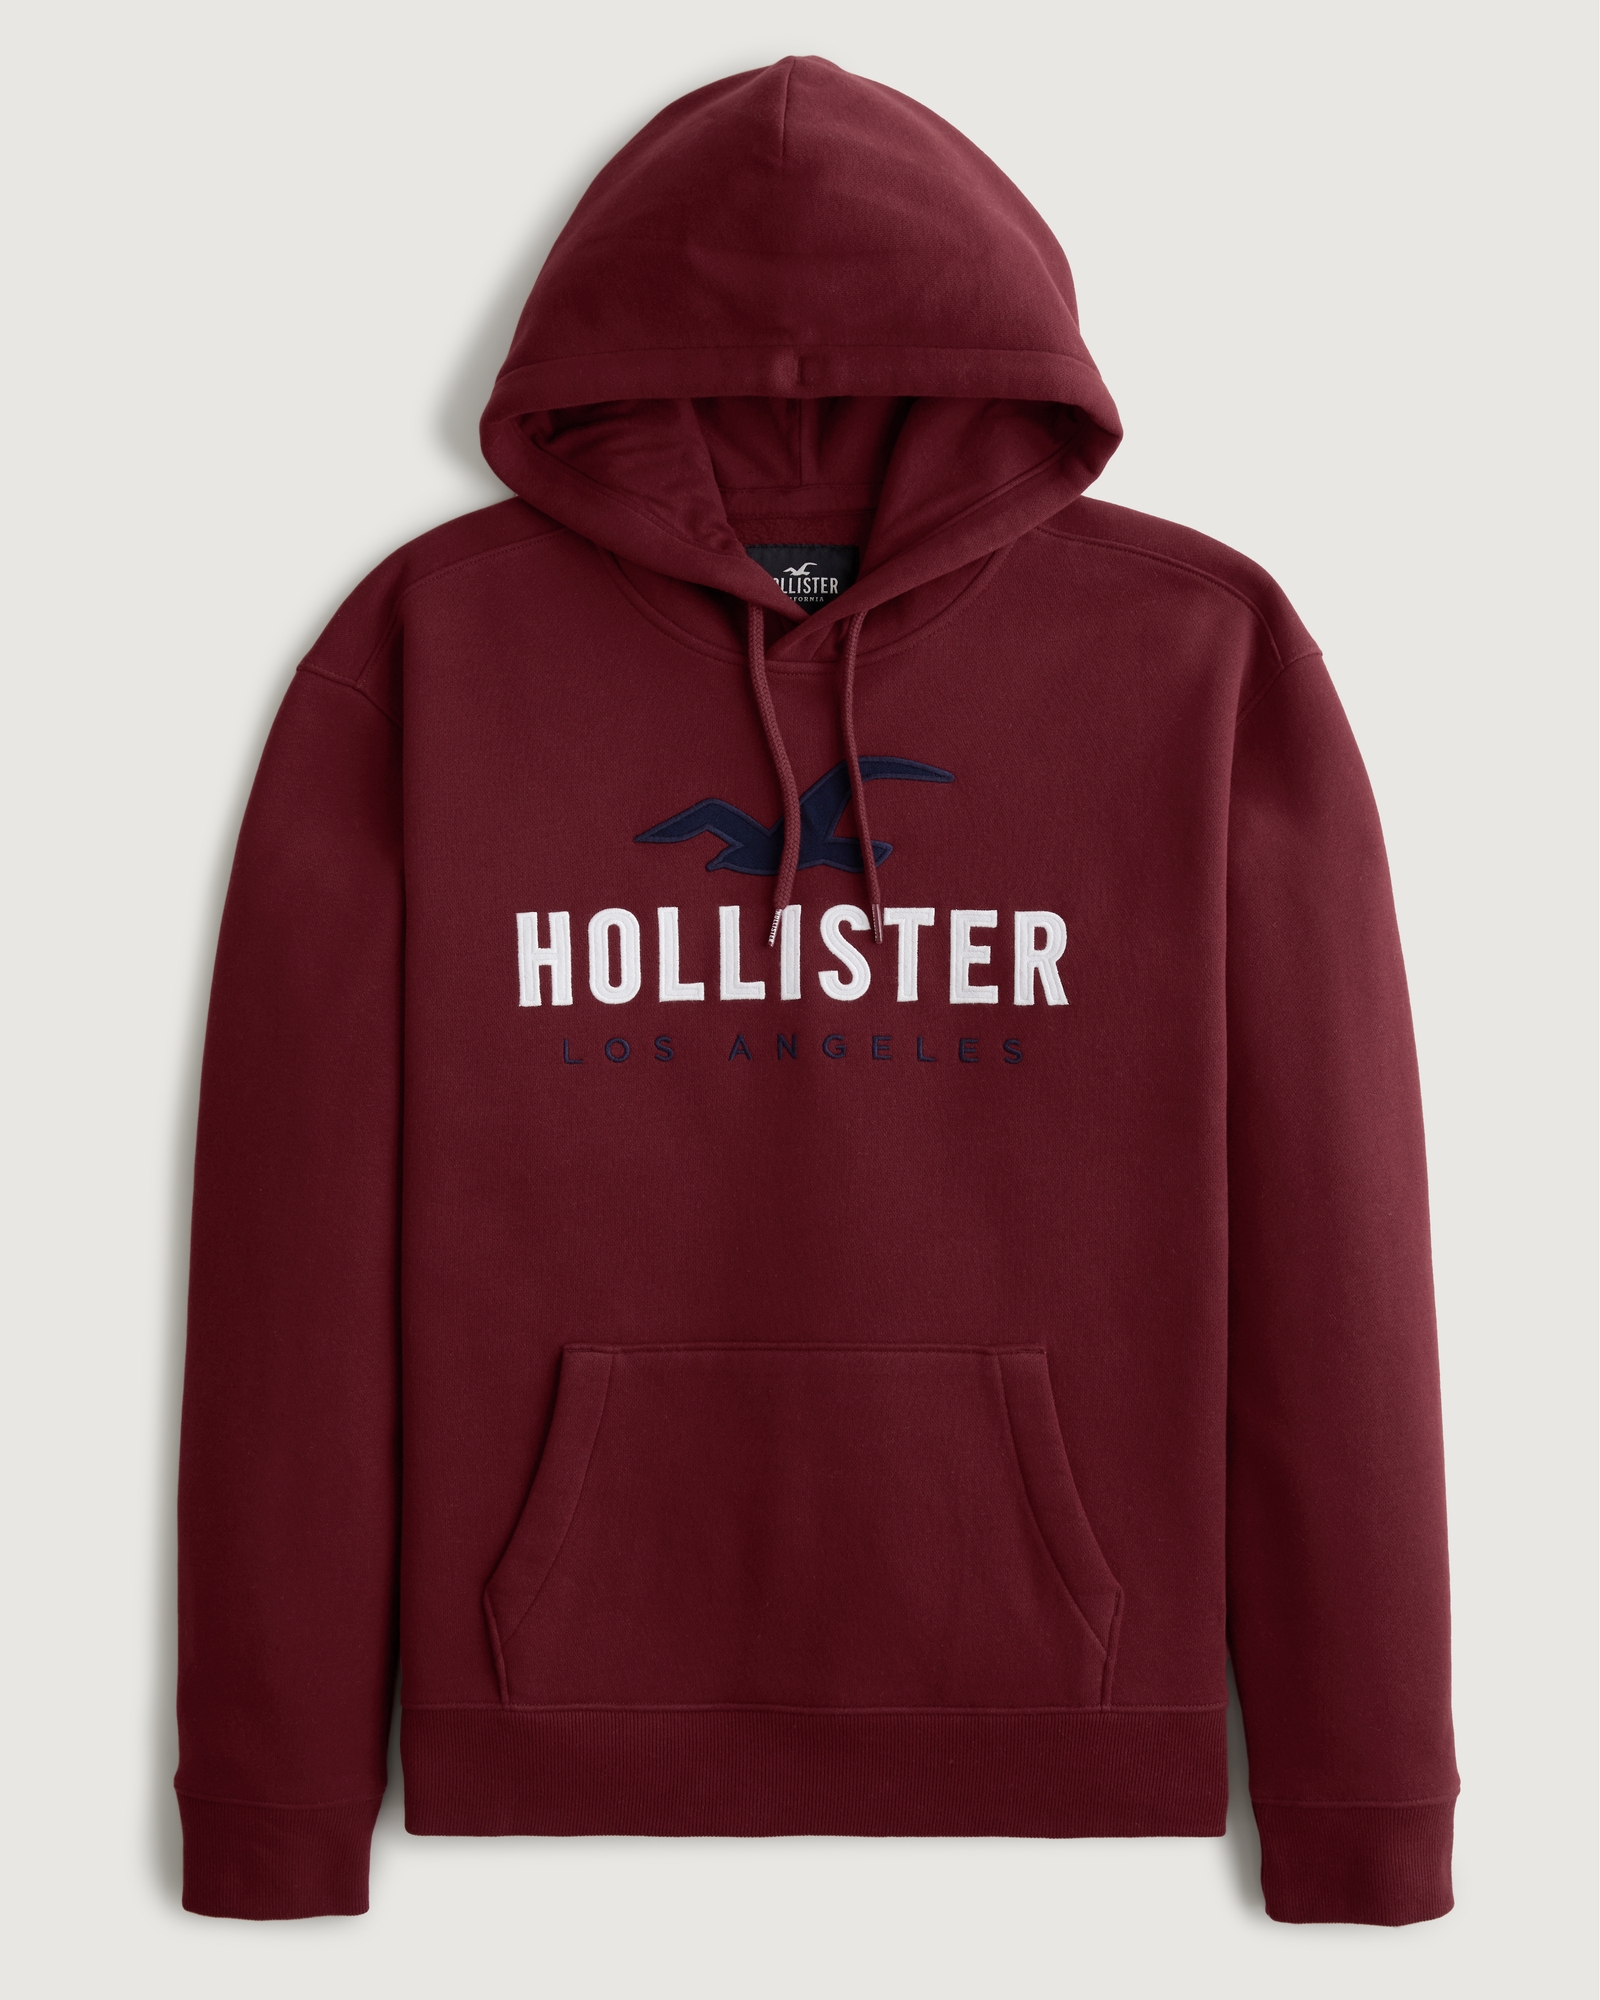 https://img.hollisterco.com/is/image/anf/KIC_322-3131-1637-520_prod1.jpg?policy=product-extra-large